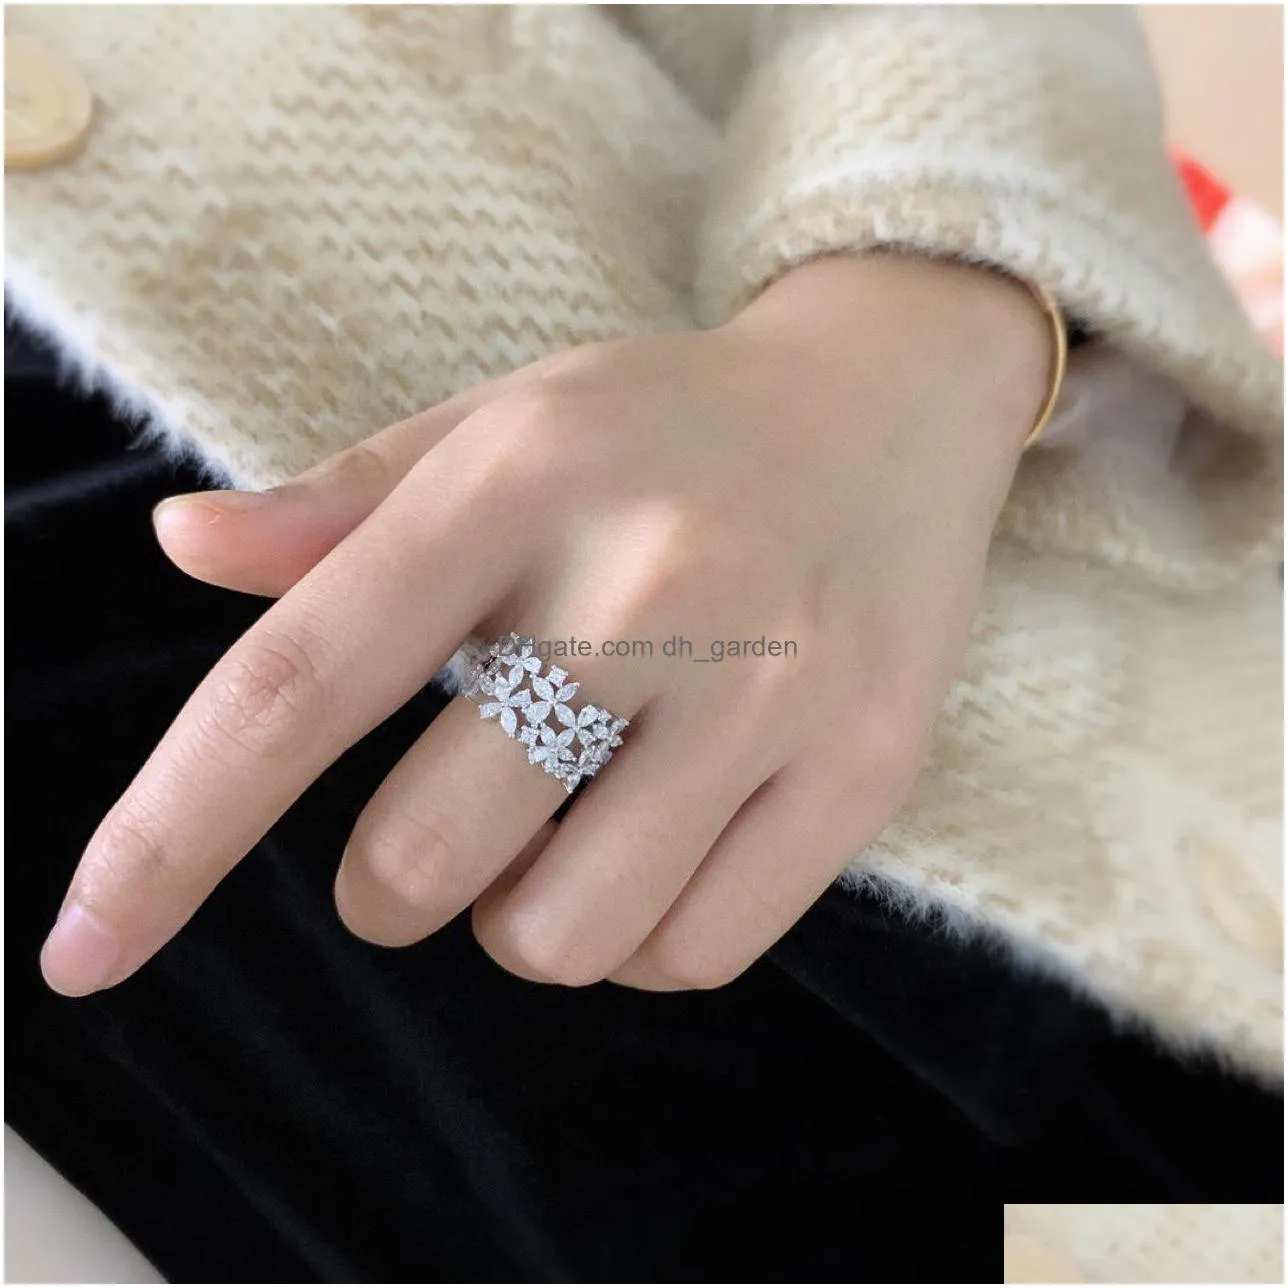 sparkling 925 sterling silver marquise cut moissanite diamond rings party women wedding leaf band ring gift hip hop jewelry